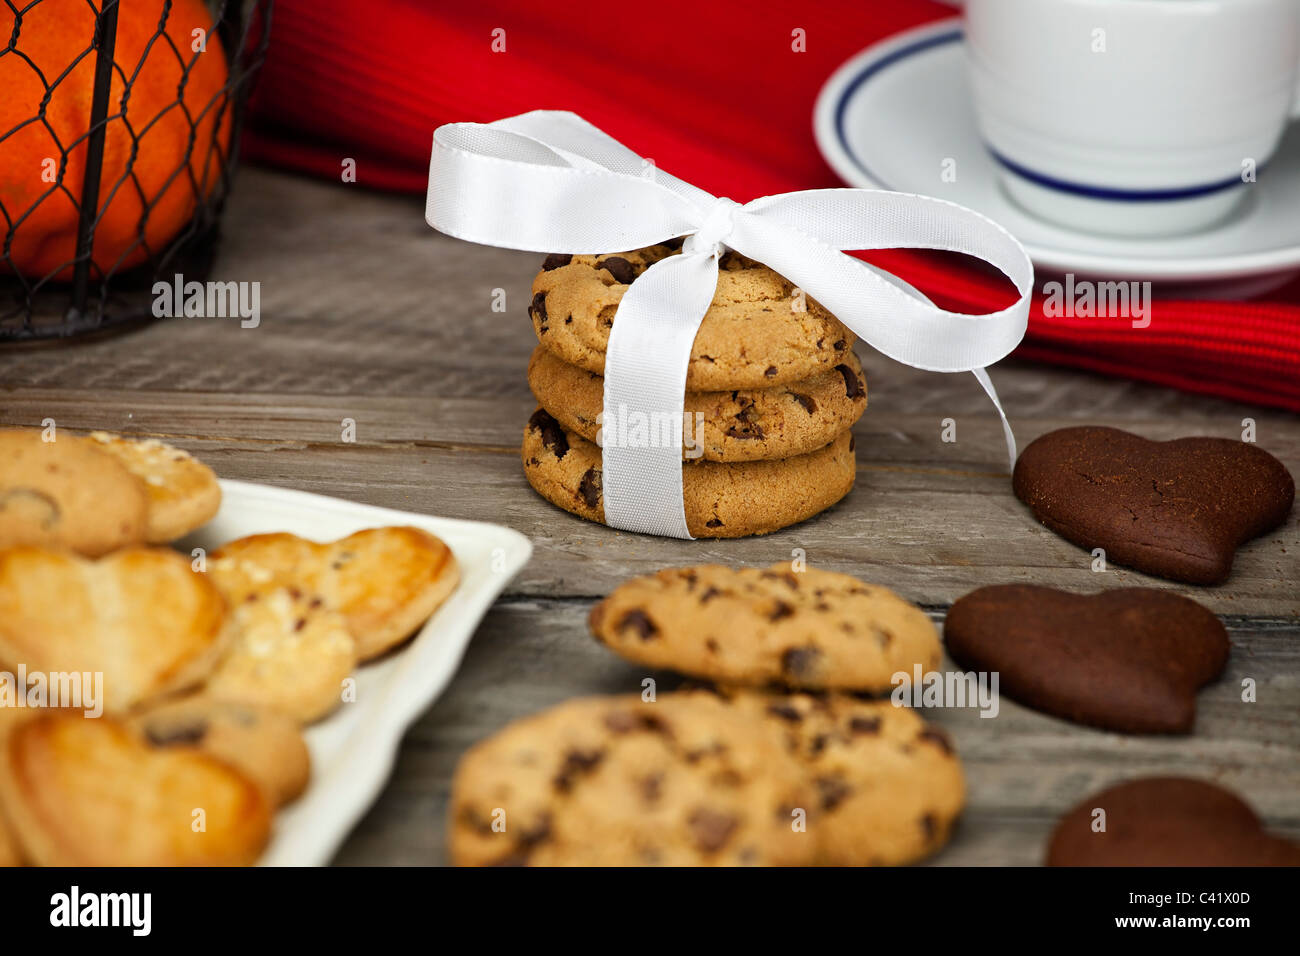 Decorated table for a snack with fruit, milk and cookies Stock Photo